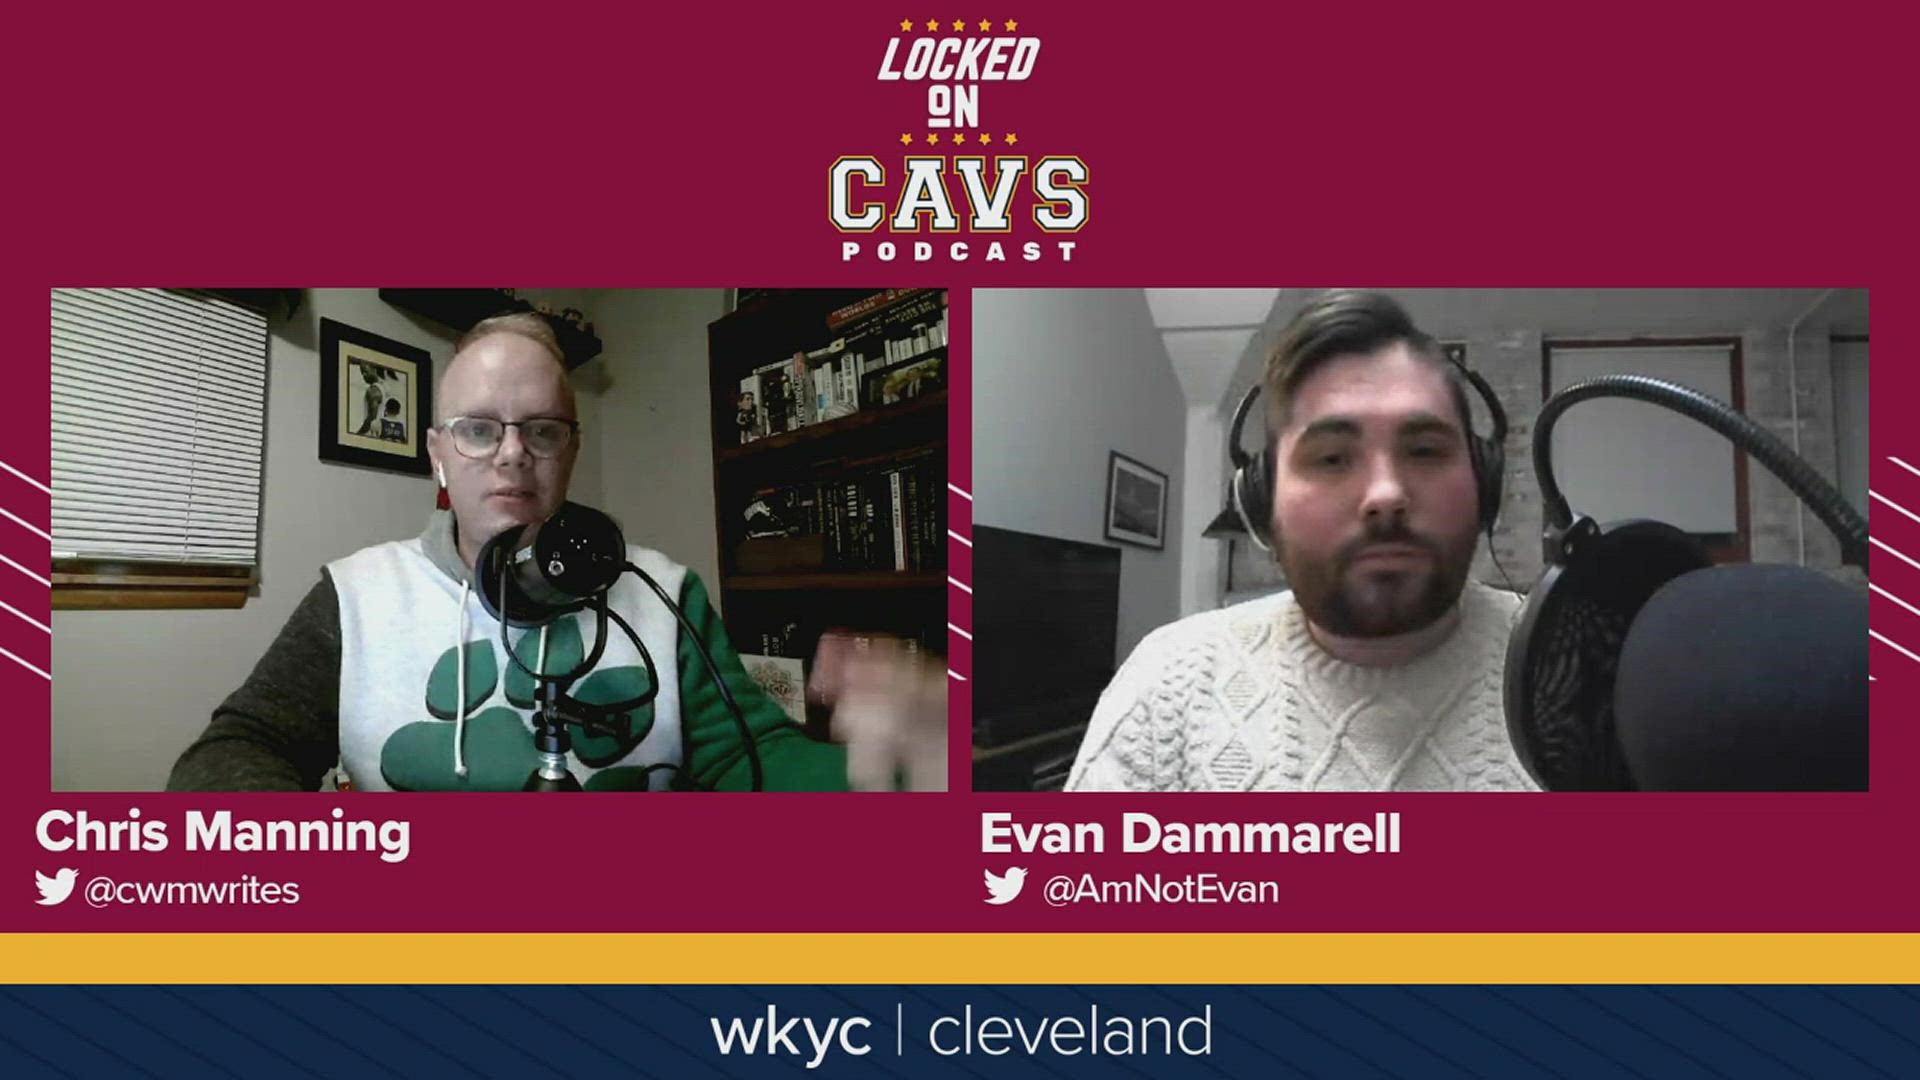 On this episode of Locked on Cavs, hosts Chris Manning and Evan Dammerall talk through the Cavs' two weekend games with a focus on Evan Mobley and  Collin Sexton.